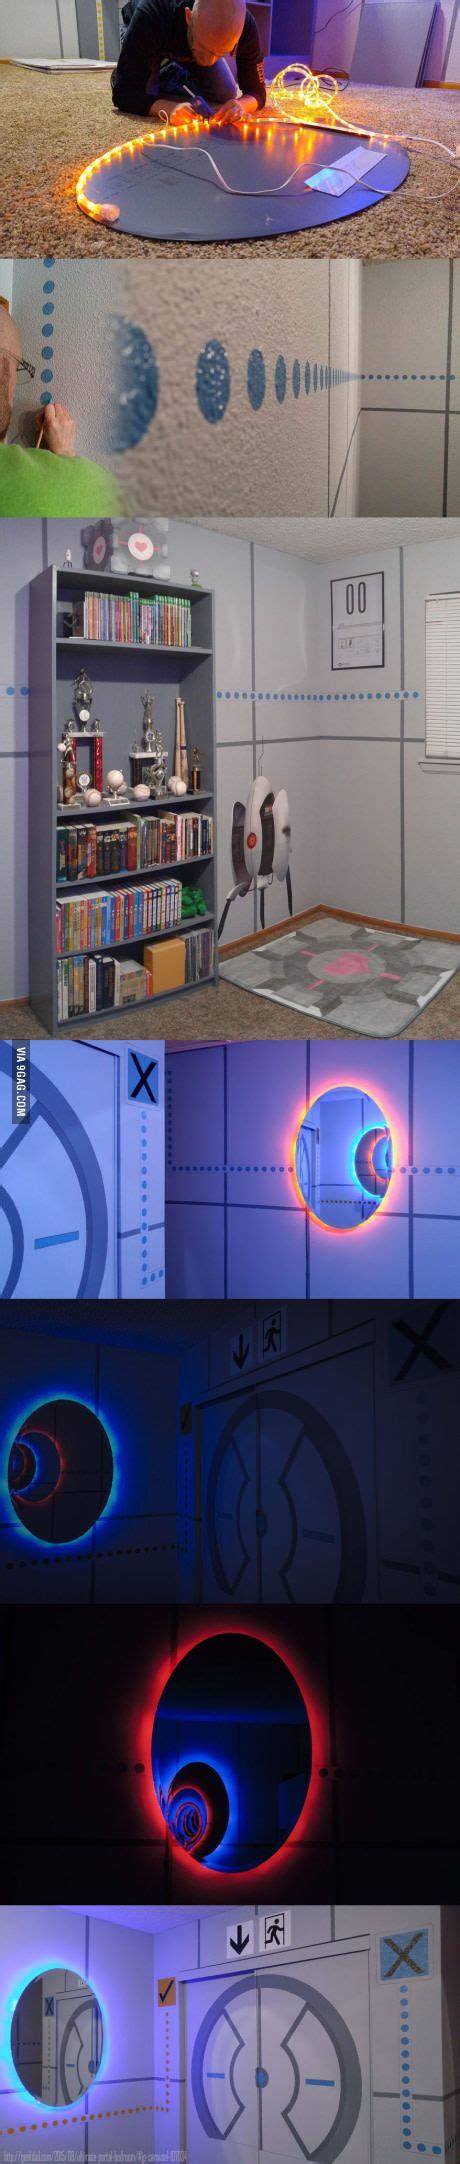 Epic Portal Themed Bedroom Video Game Rooms Game Room Bedroom Themes